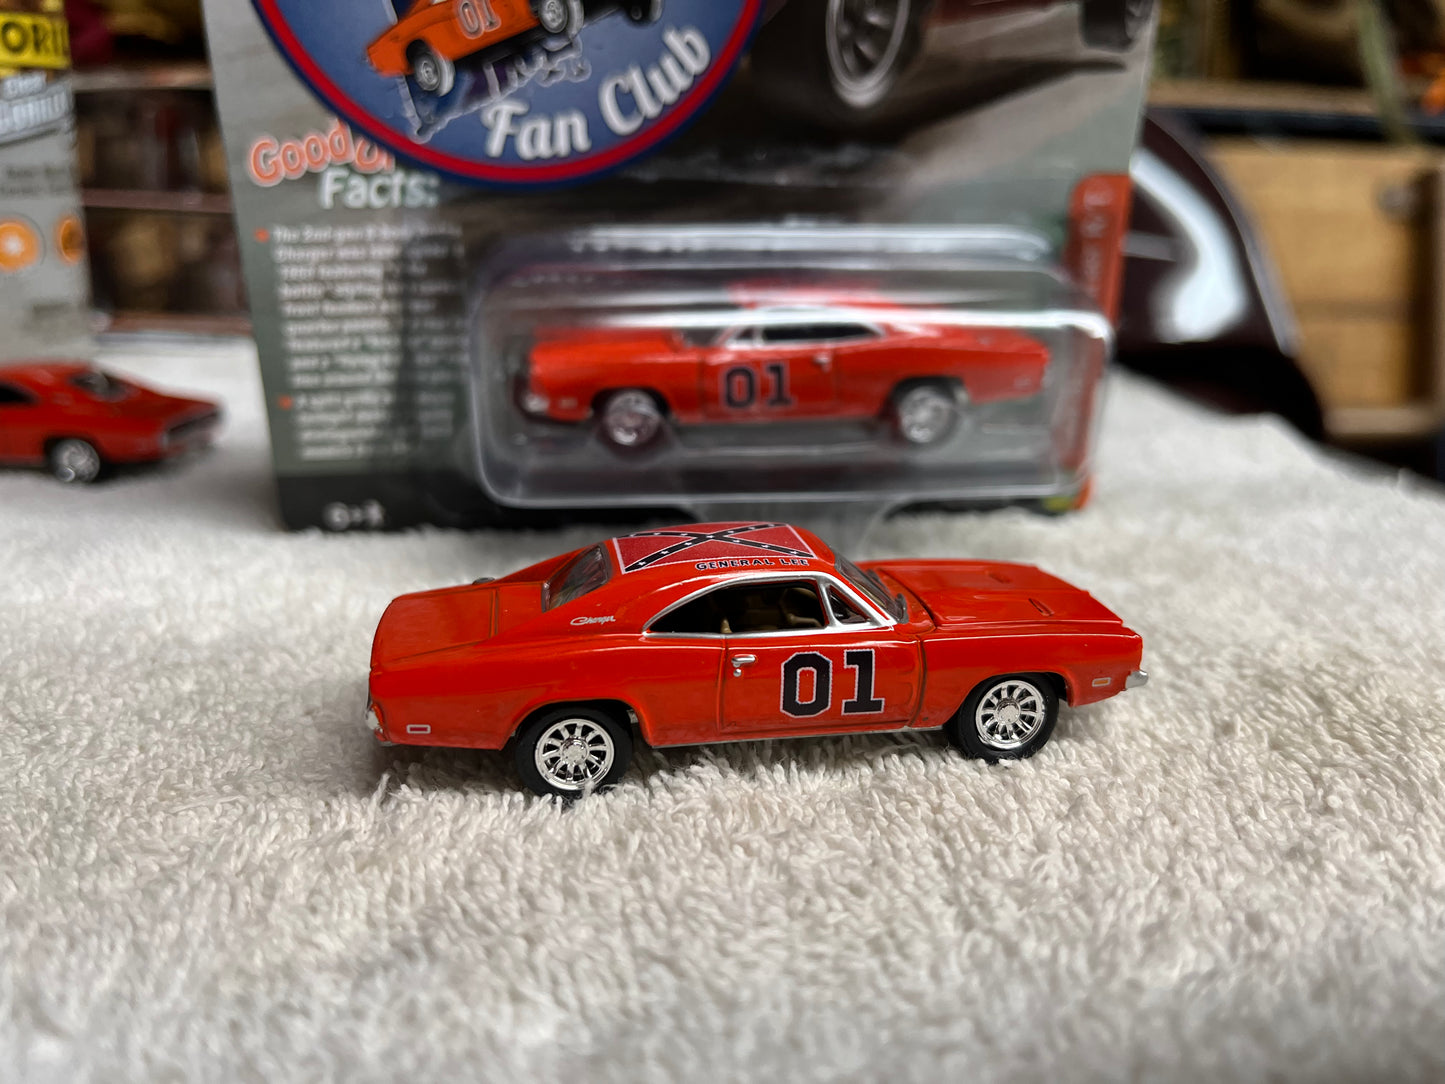 1/64 GENERAL LEE Johnny Lightning (New England Dukes Exclusive) PREORDER JULY